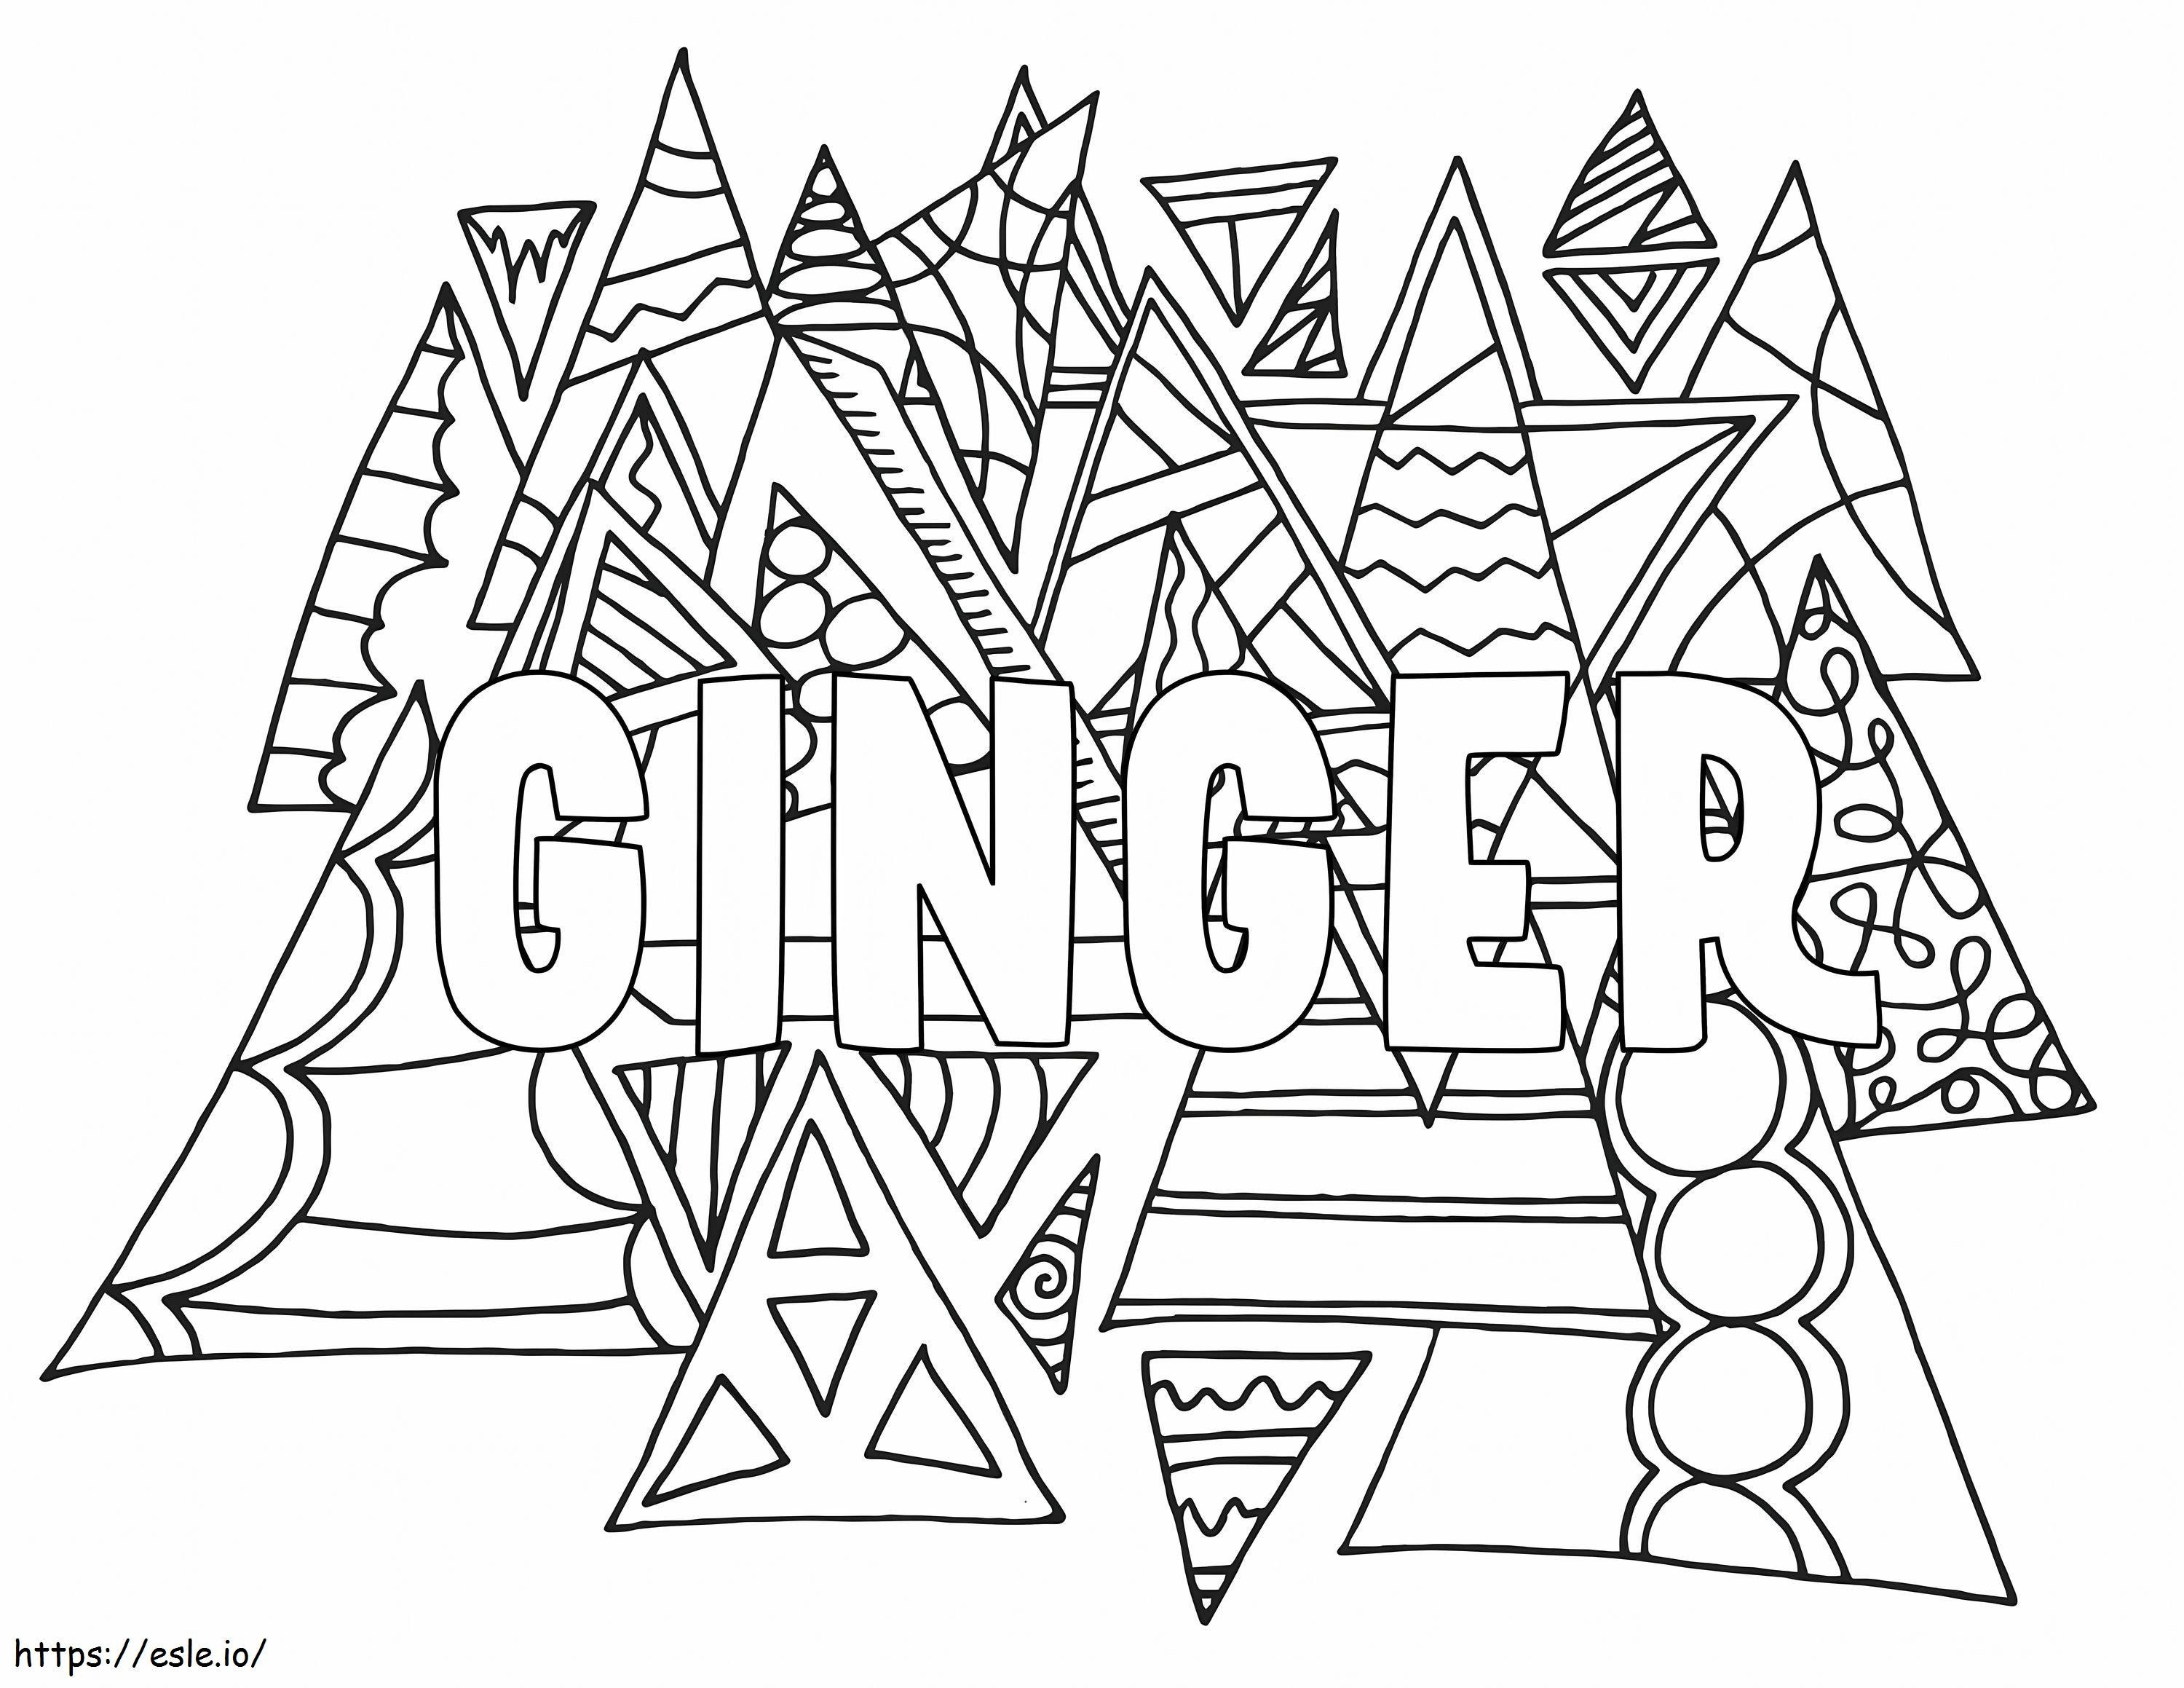 Ginger Is For Adults coloring page